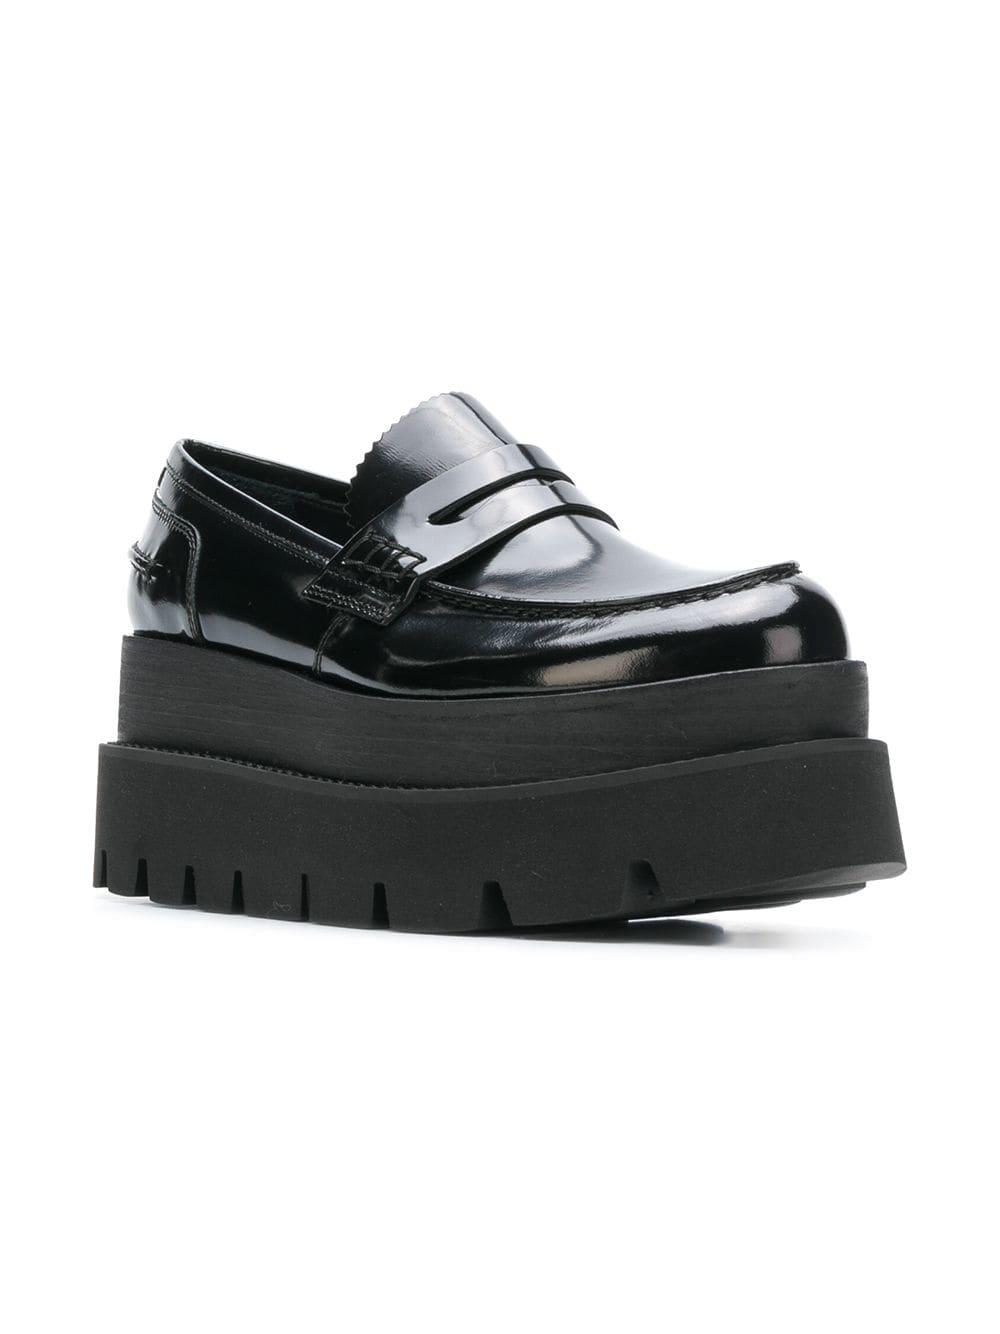 MM6 by Maison Martin Margiela Leather Platform Loafers in Black - Lyst